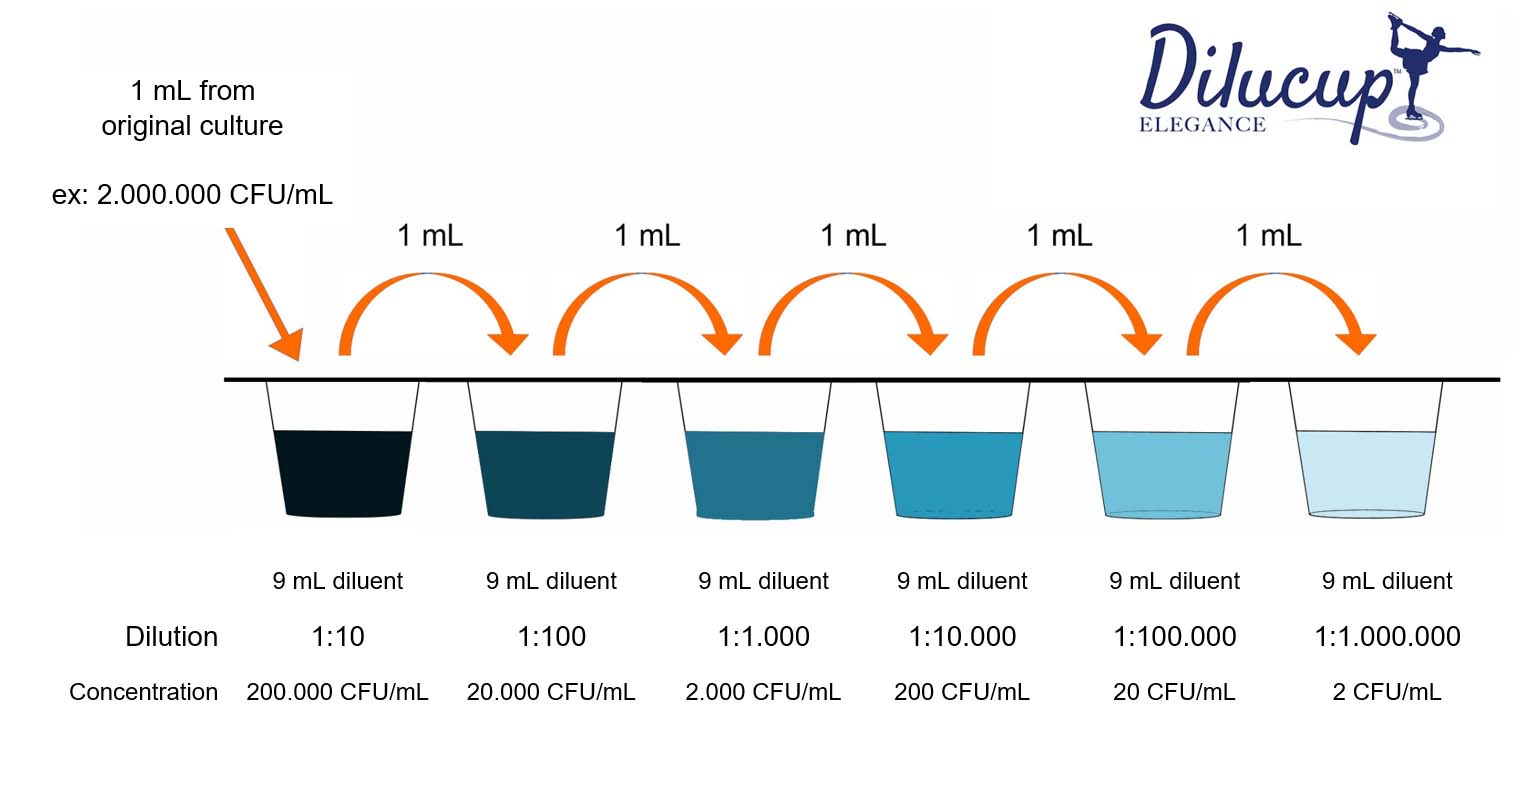 serial dilution dilucup